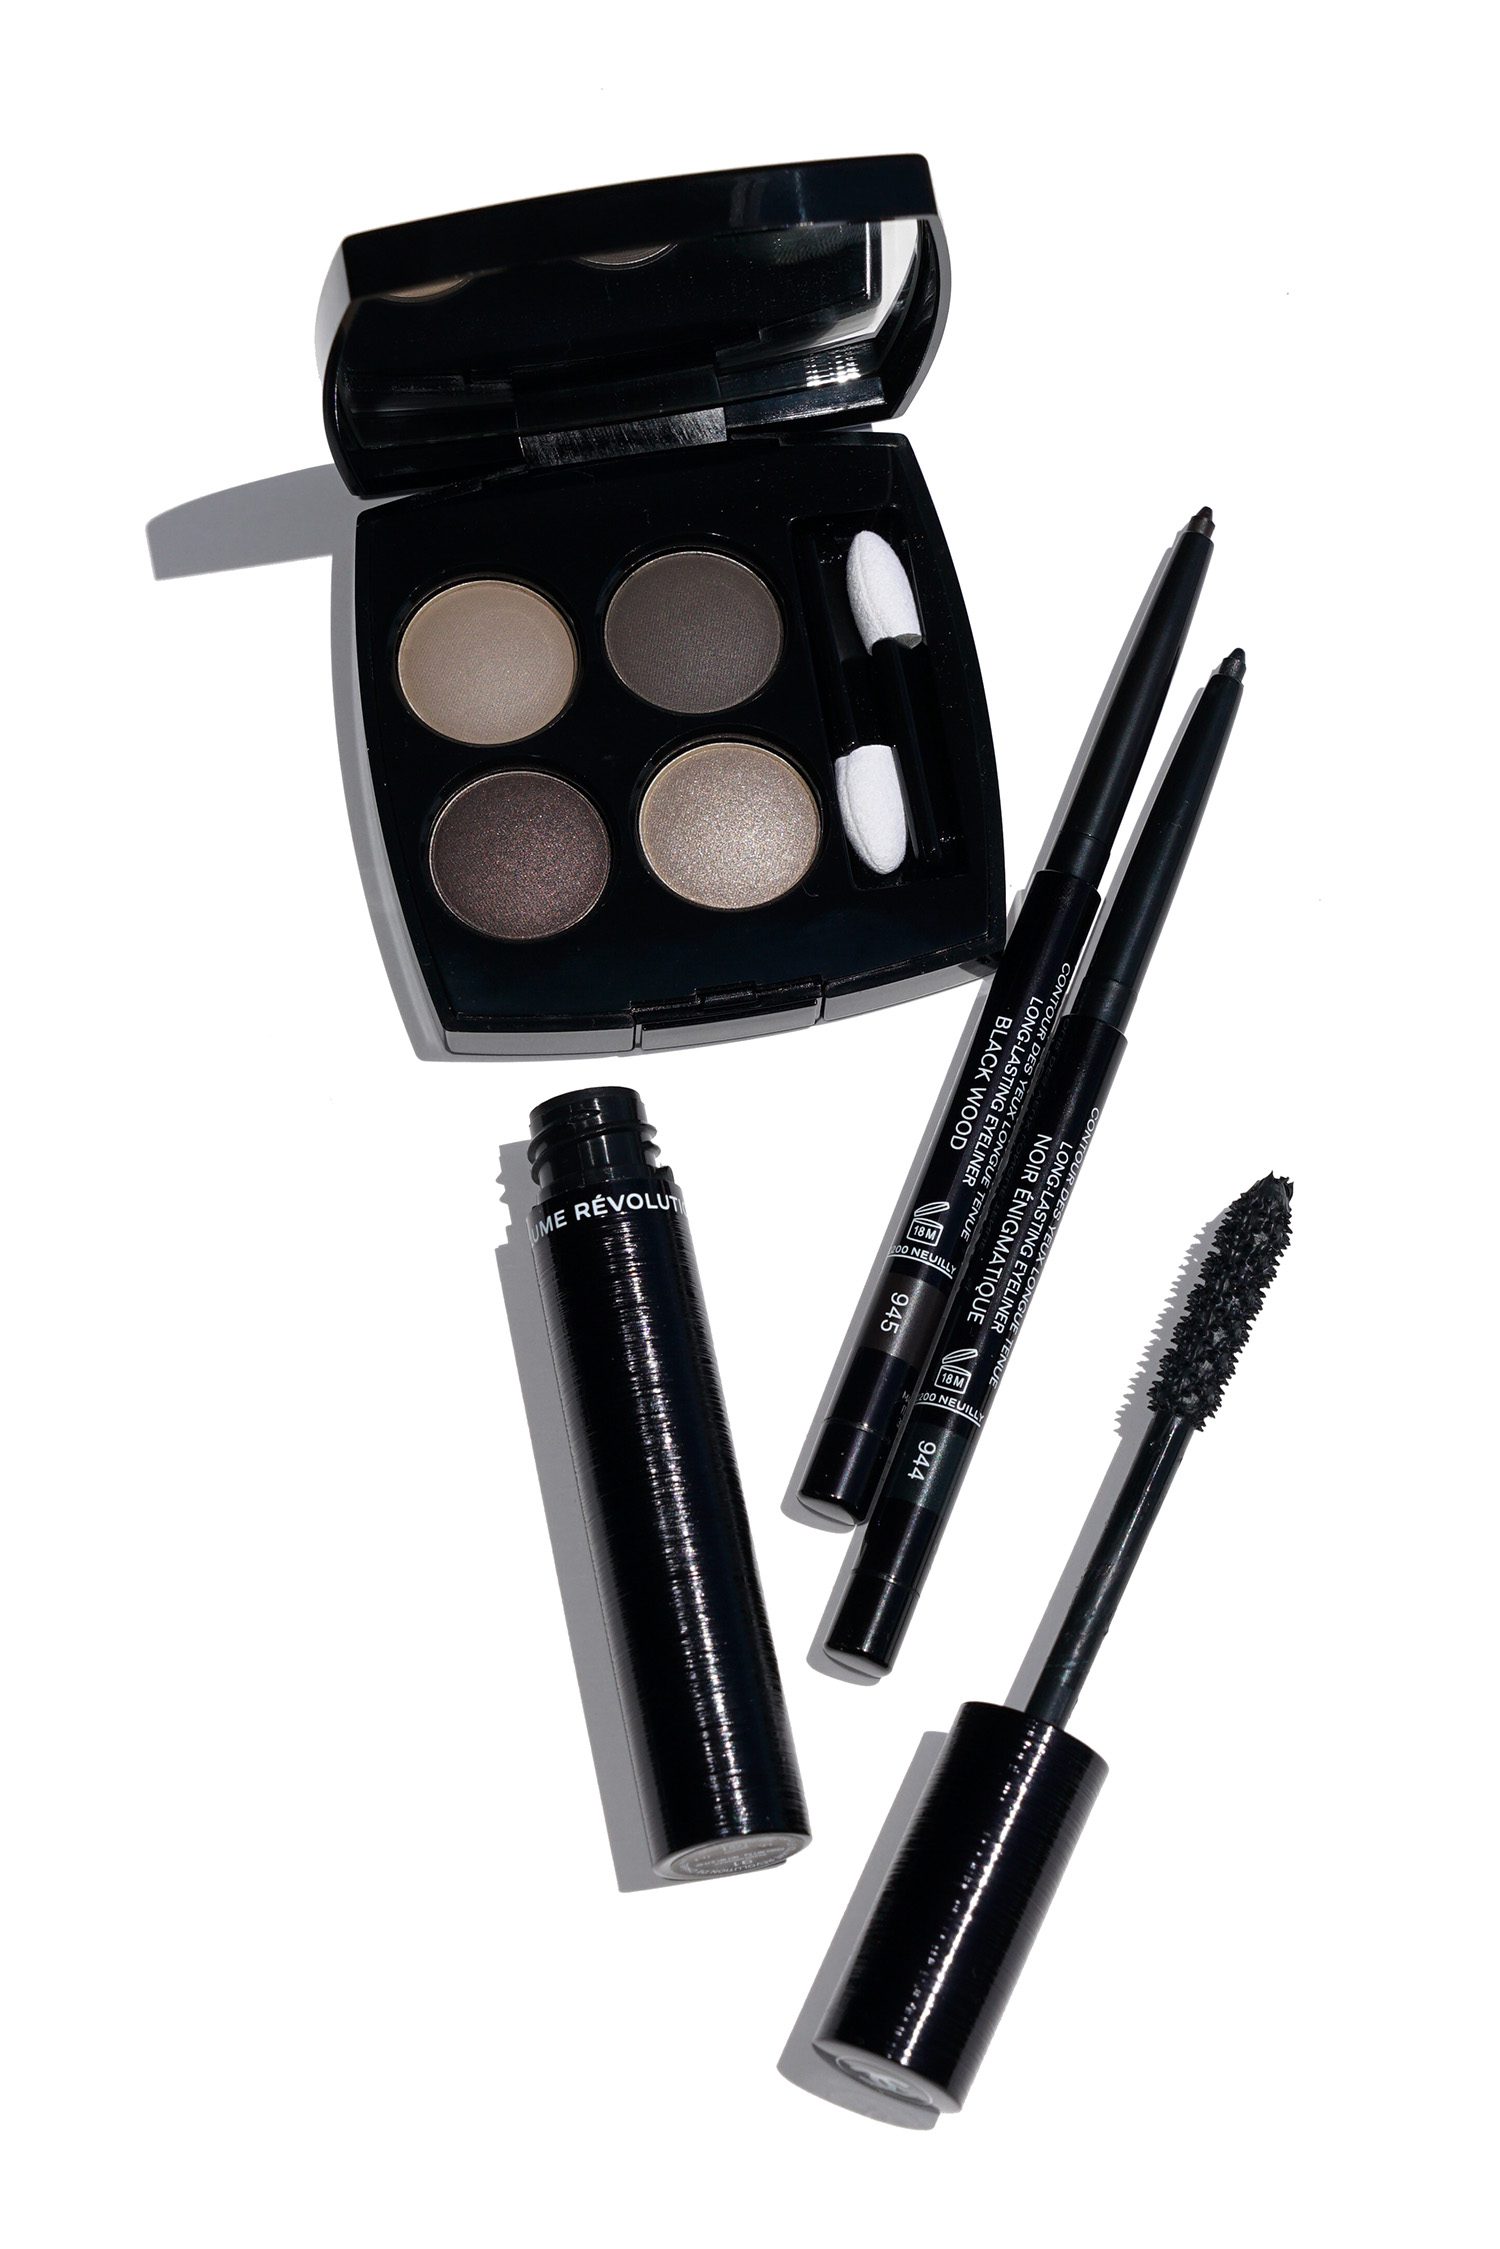 Chanel New Eye Collection Review + Swatches - The Beauty Look Book